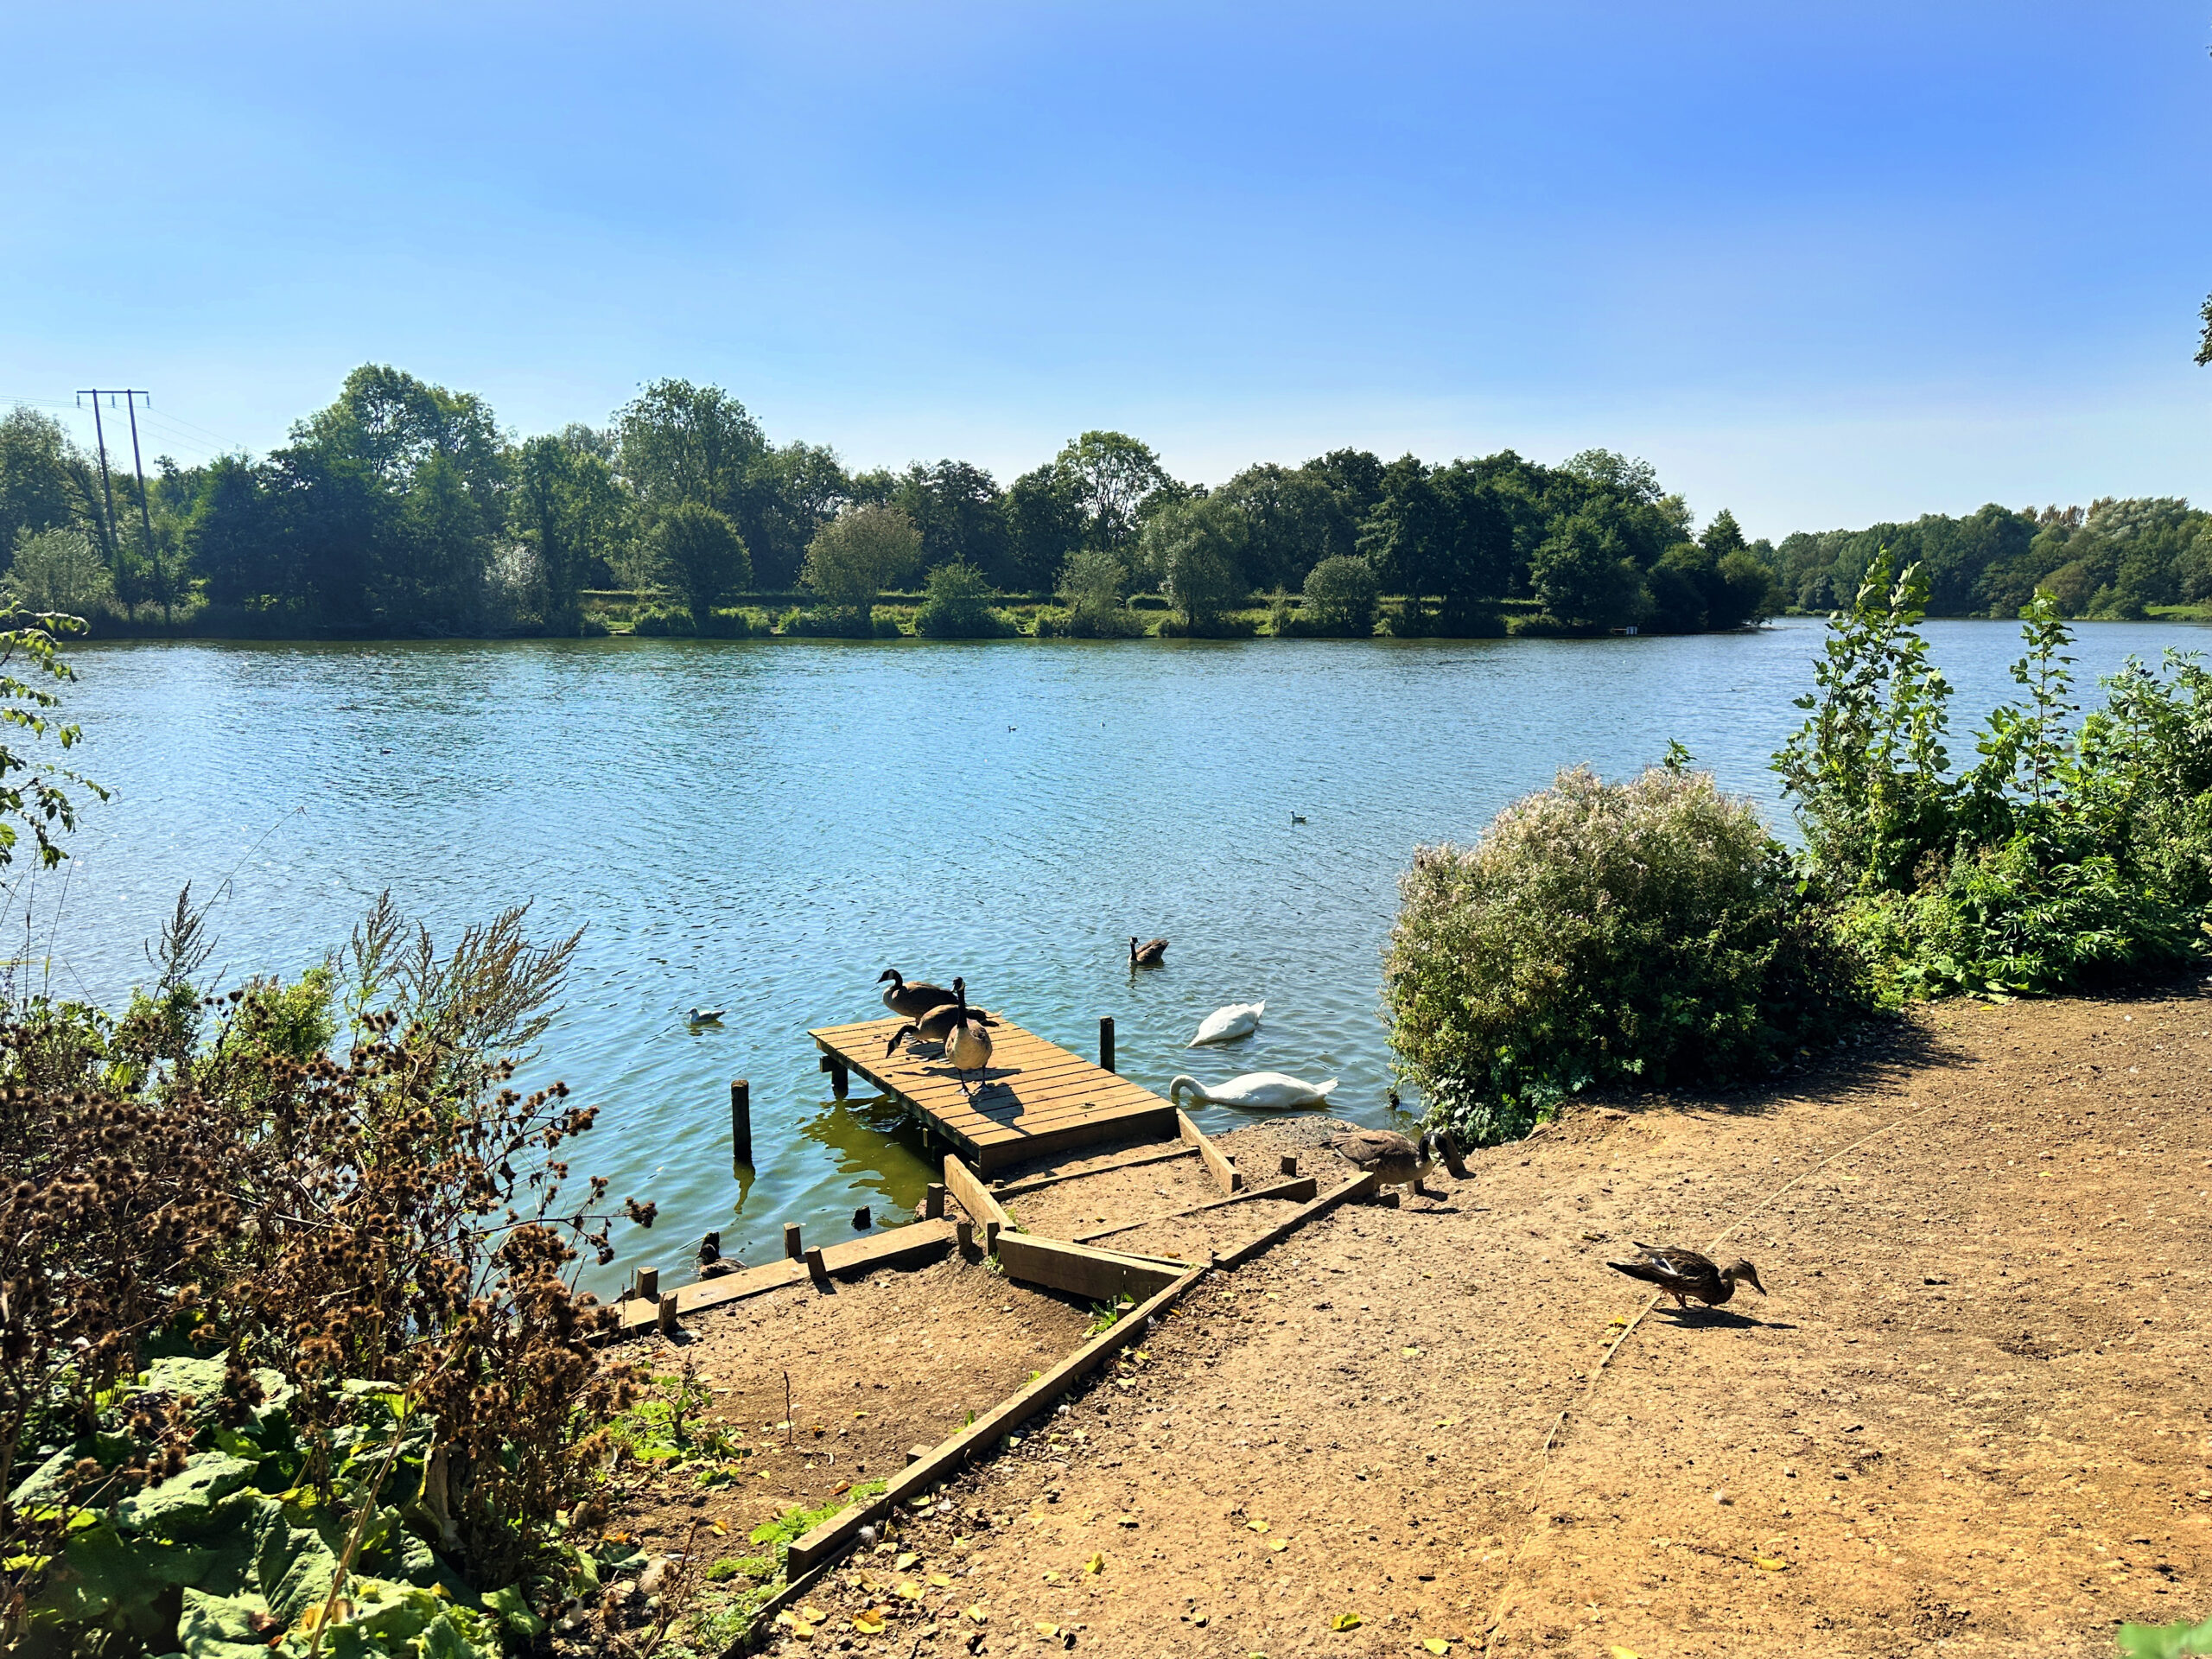 Landscape photo of Arrow Valley Park in Redditch looking out across the lake